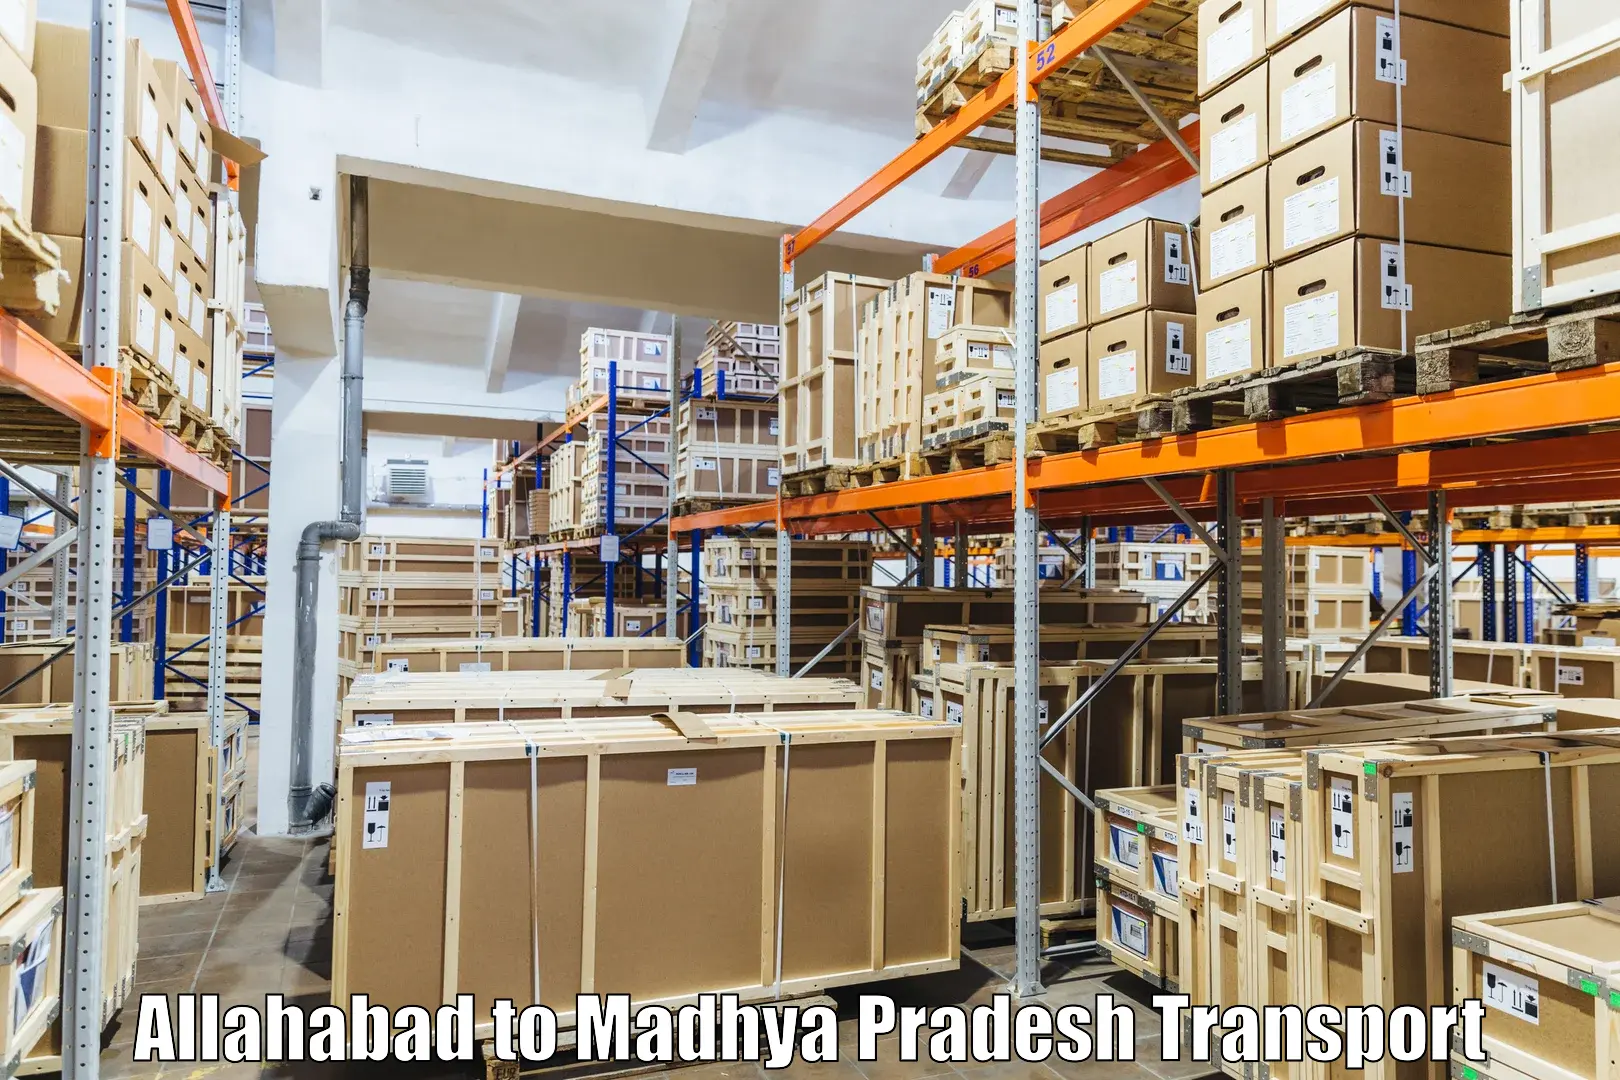 Daily parcel service transport Allahabad to Khandwa